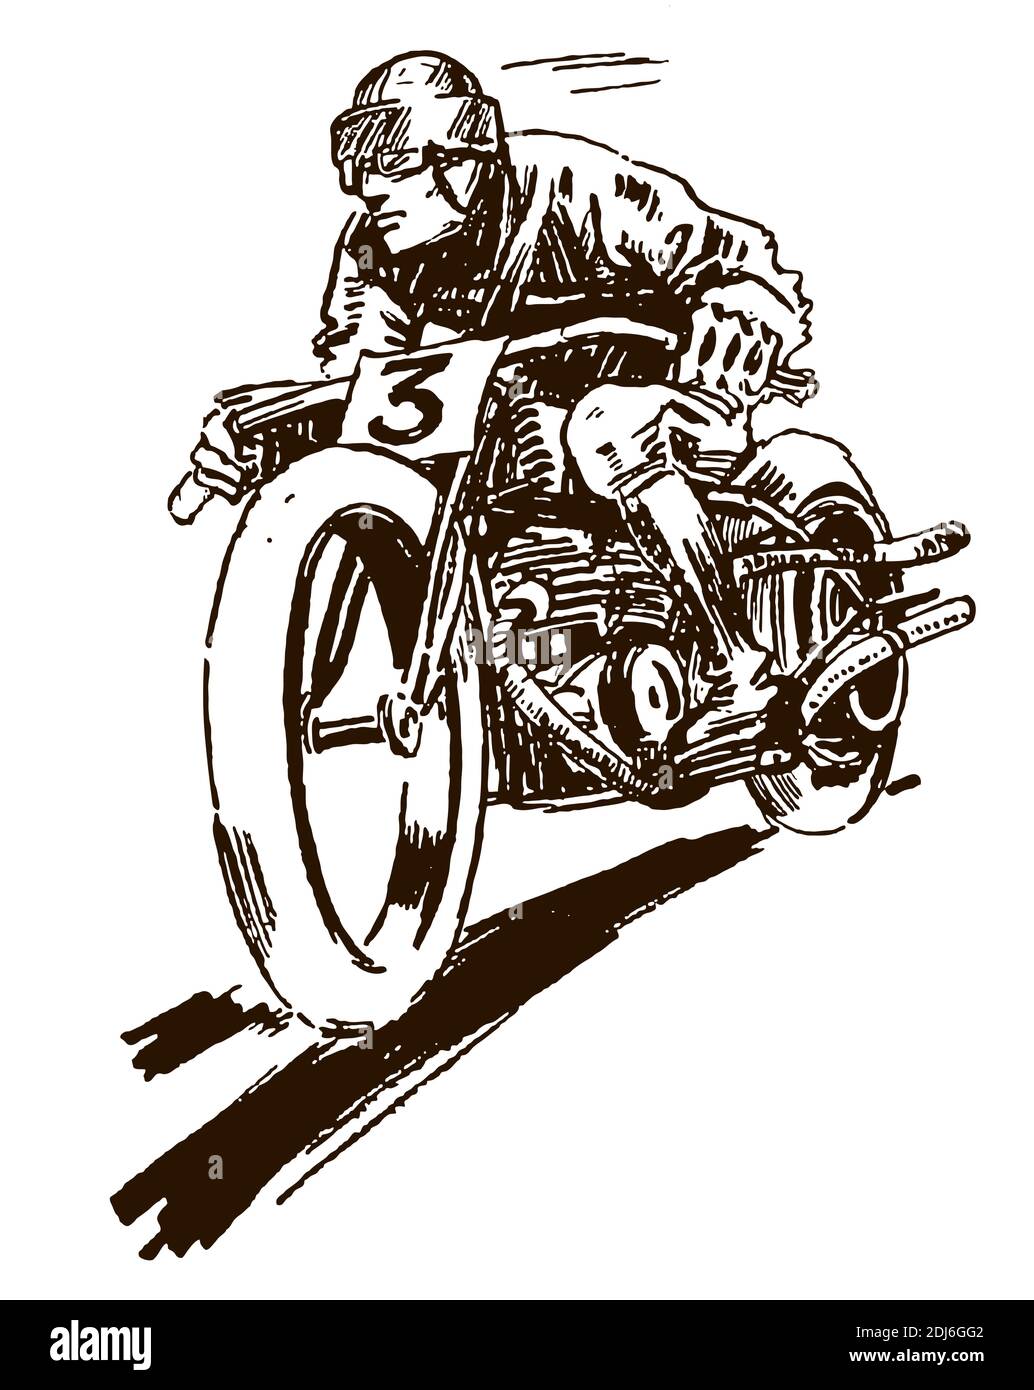 Classic racing motorcycle rider at high speed, after an illustration from the early 20th century Stock Vector